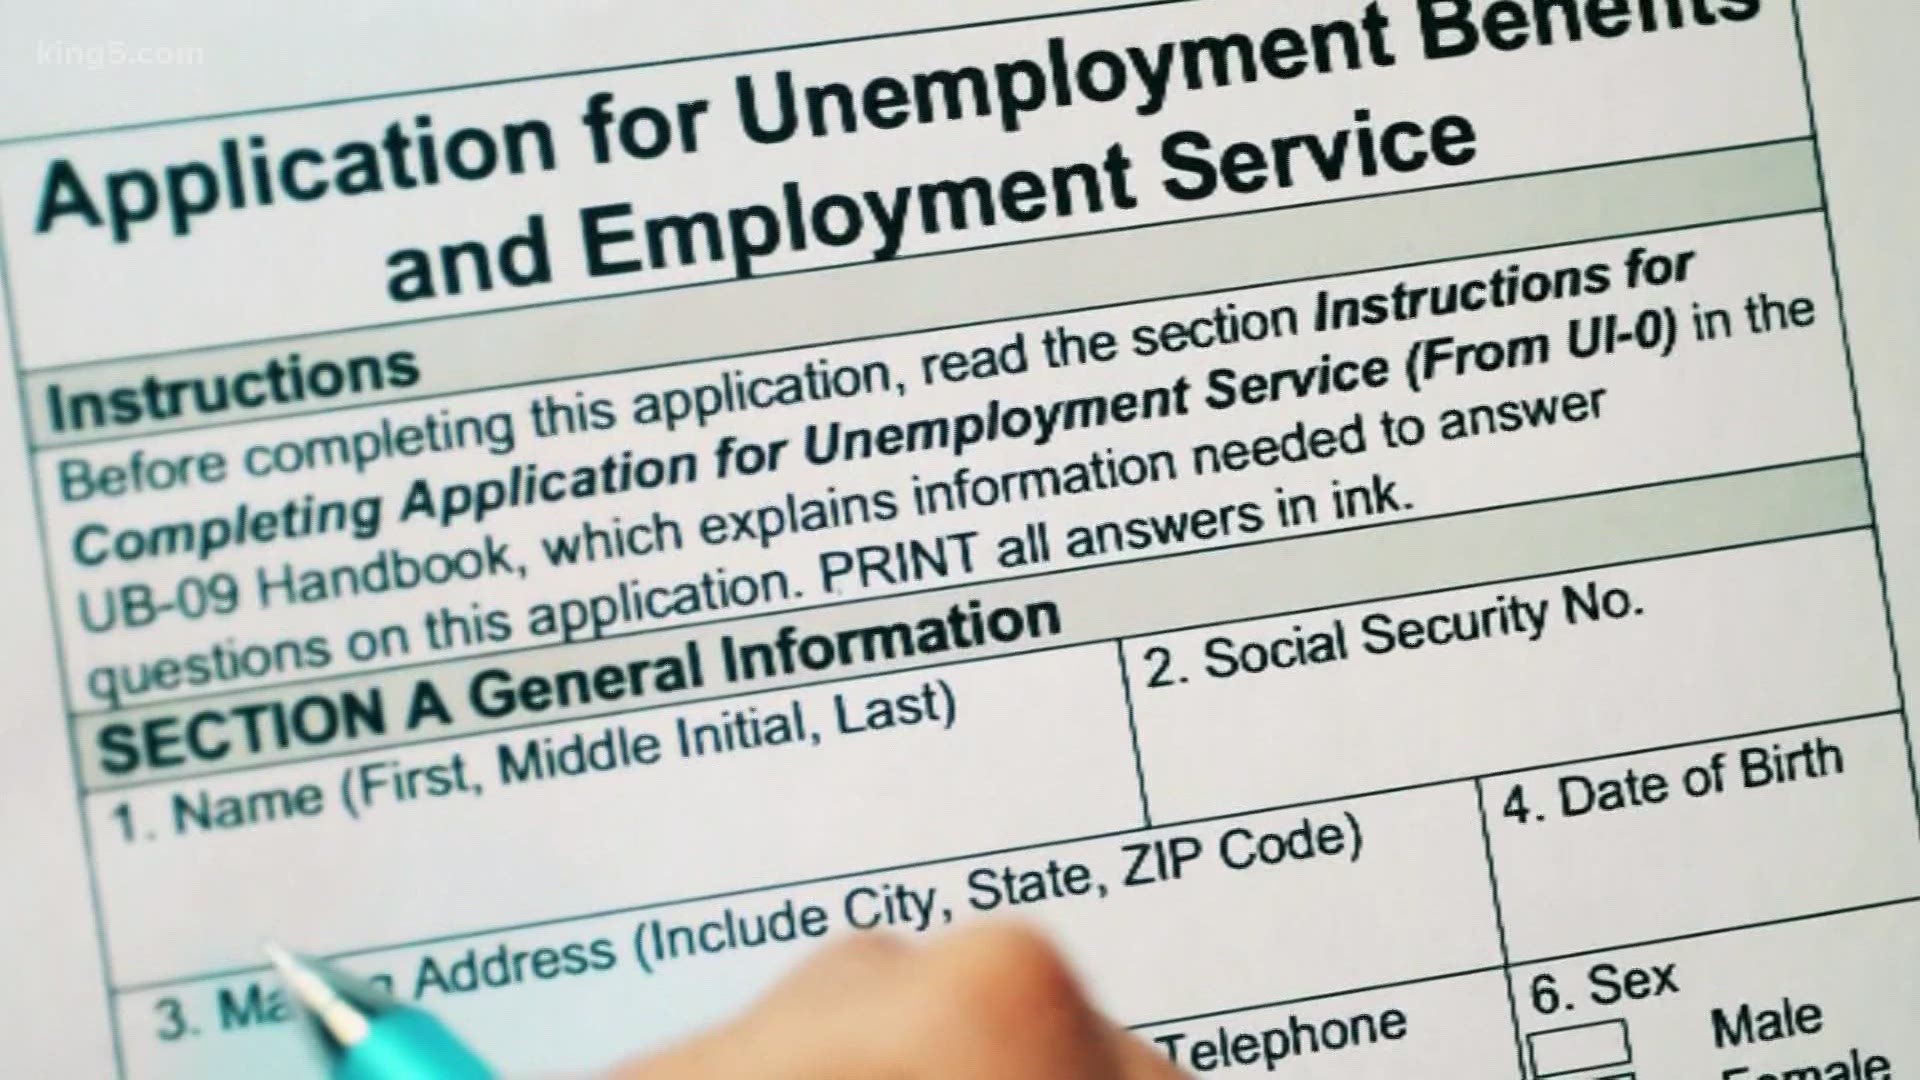 There are some changes to the federal Pandemic Unemployment Assistance that will require a little more work on the applicant’s end starting August 8, 2020.